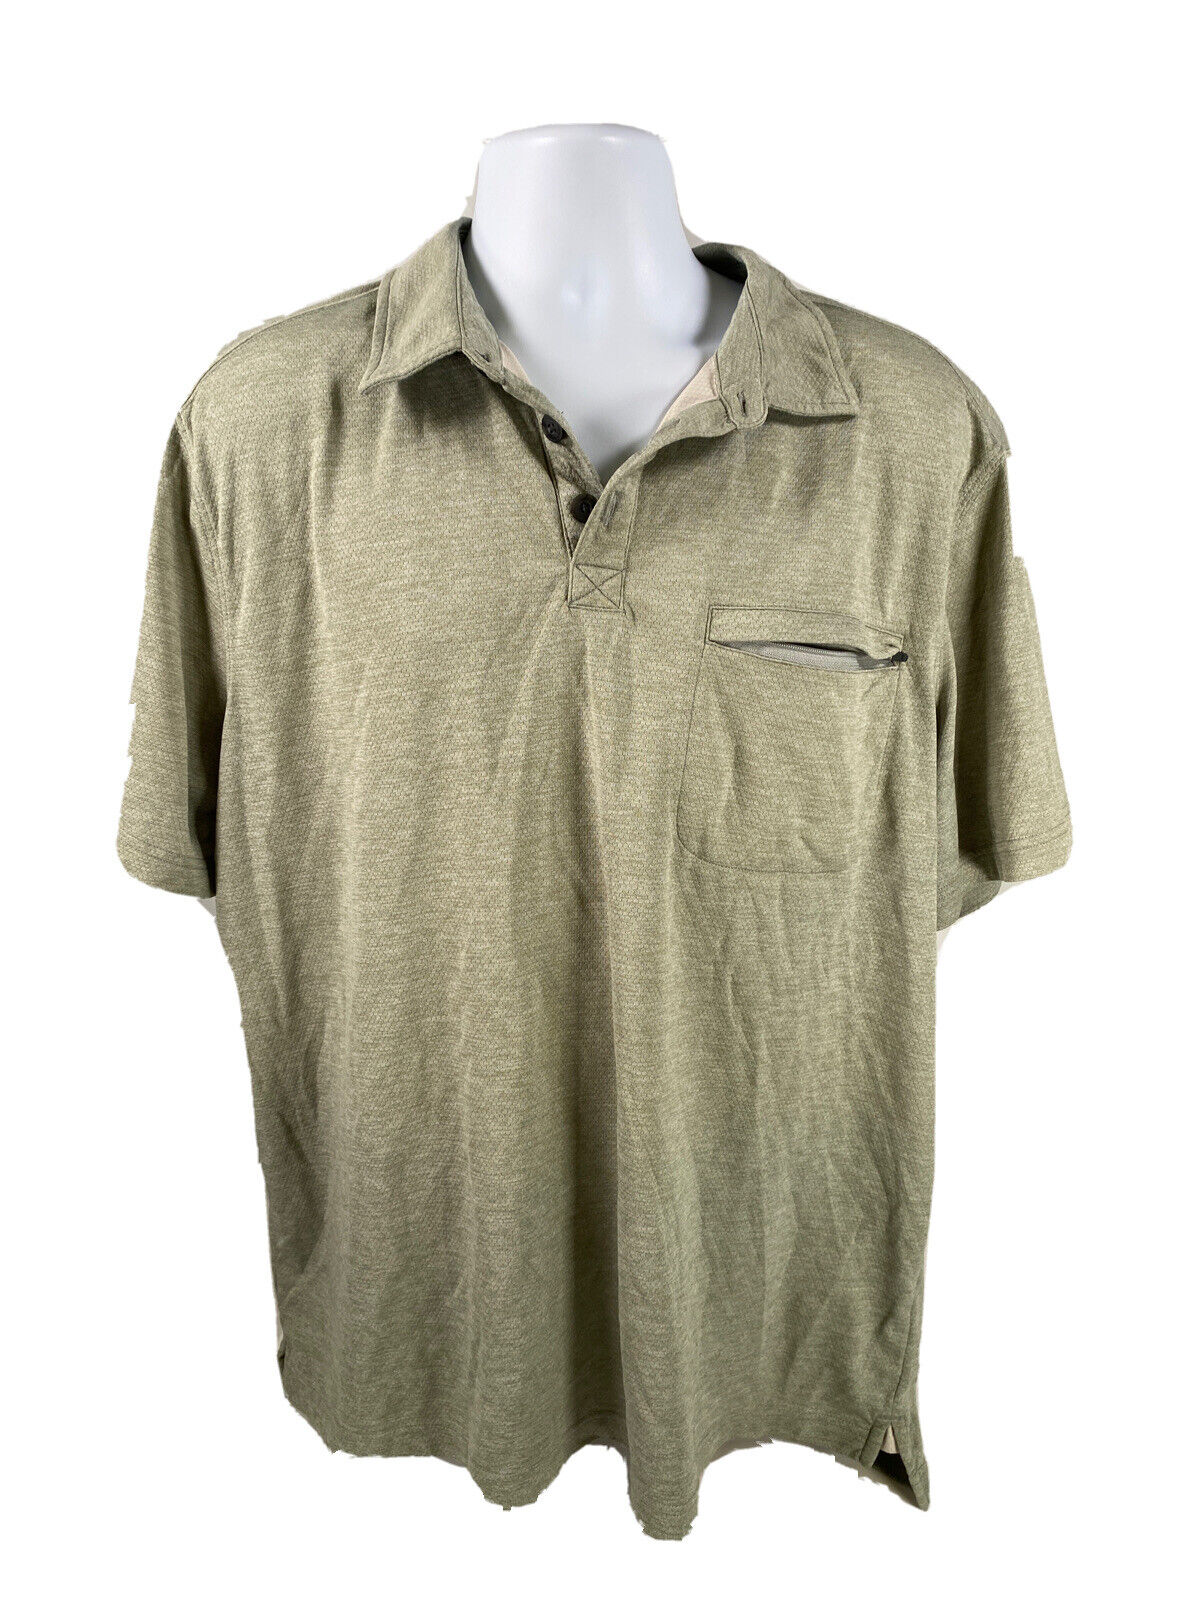 Duluth Trading Co Men's Green Solid Polyester/Nylon Polo Shirt - XL